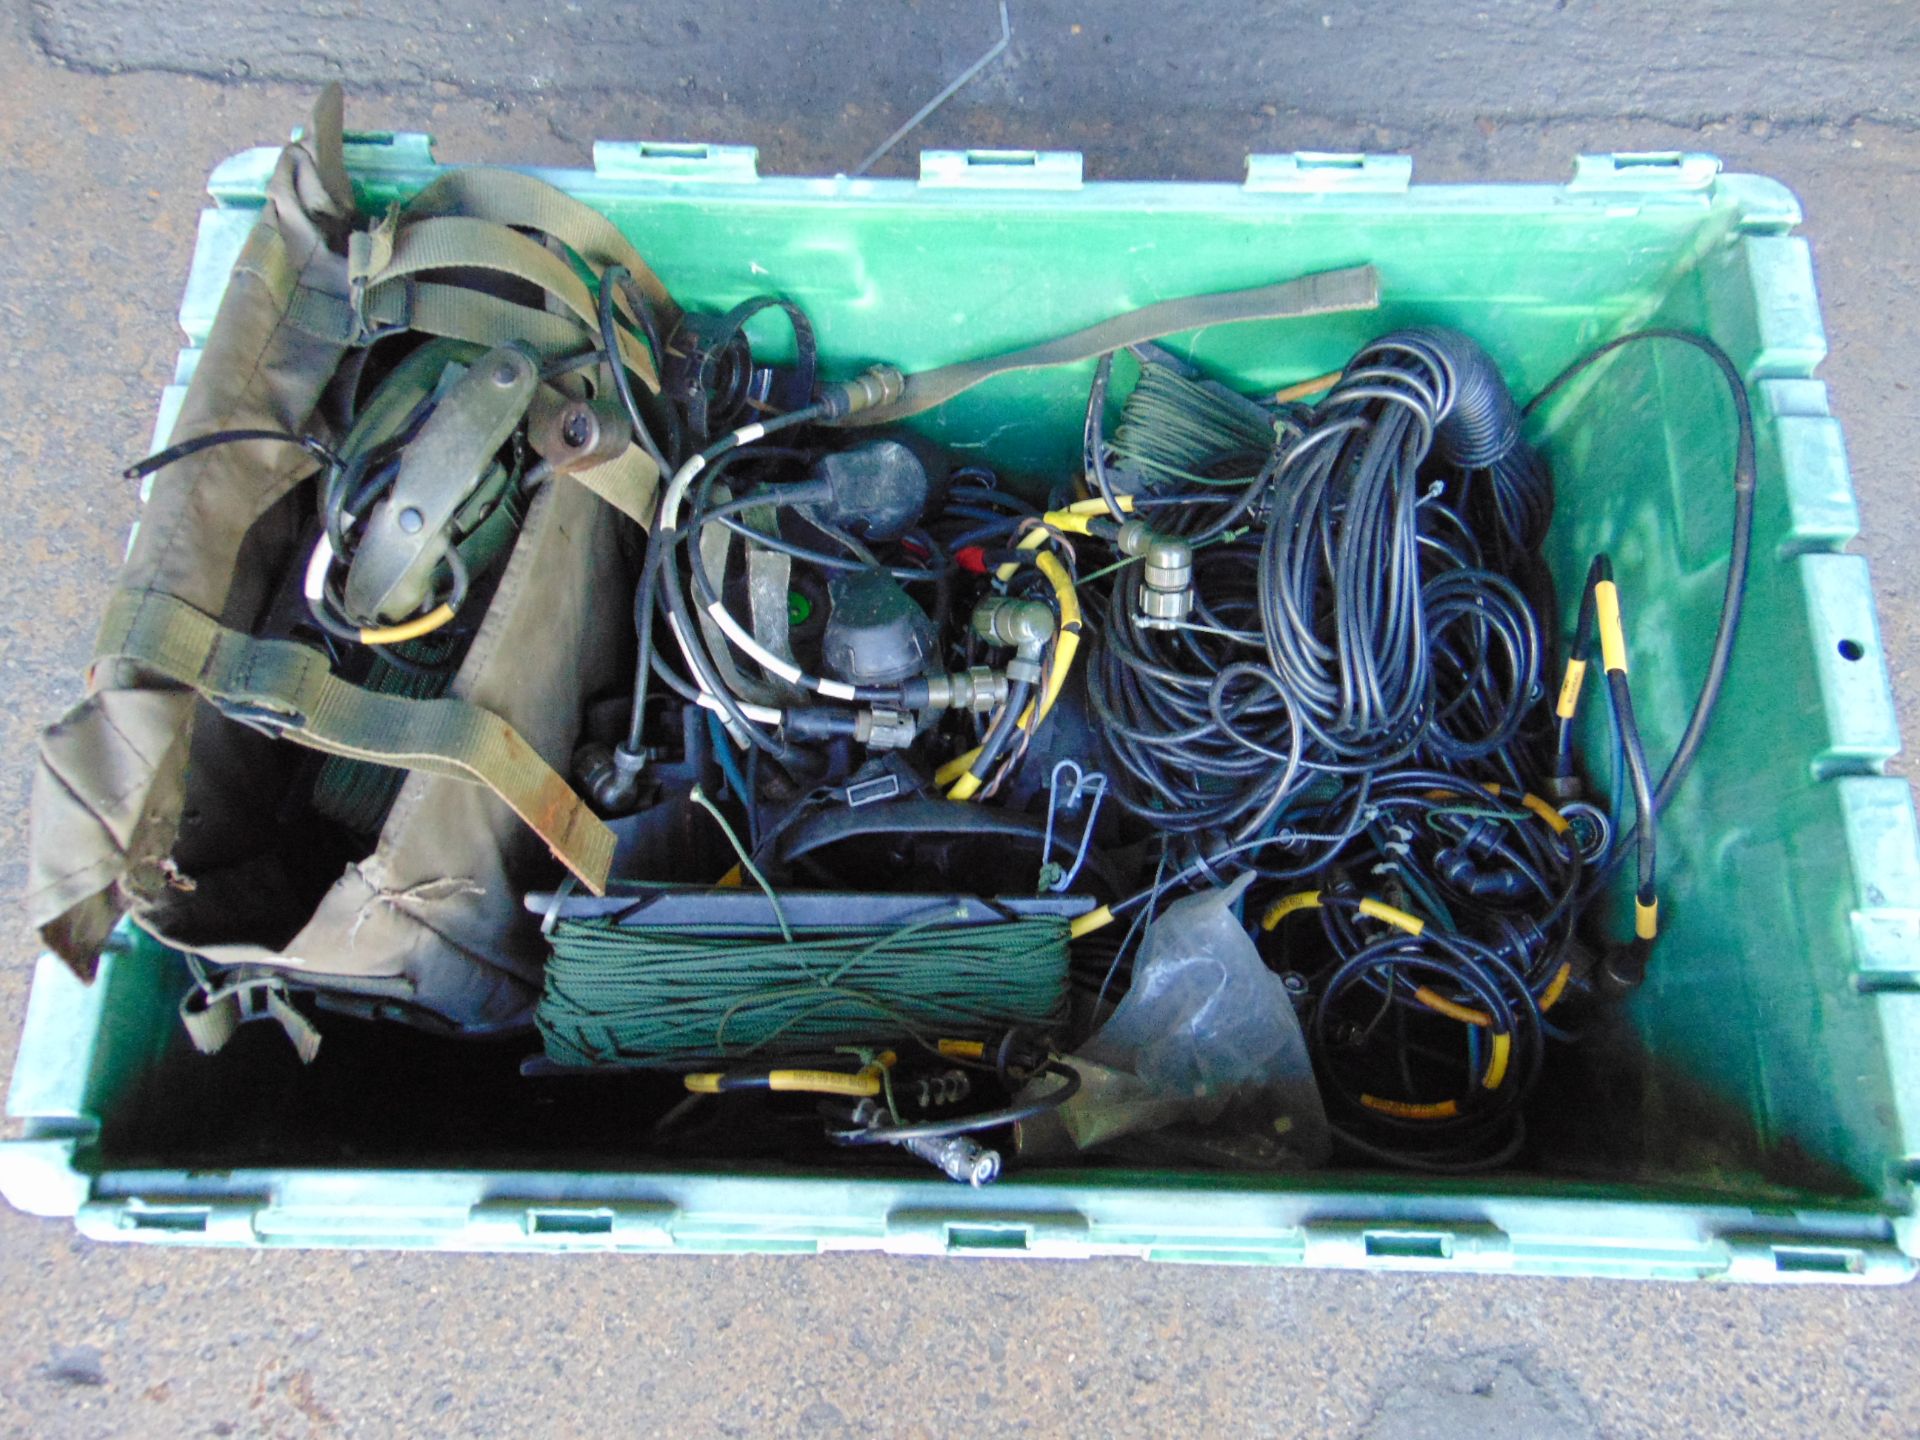 Clansman Radio Cables, Antennas, Headsets etc - Image 3 of 4